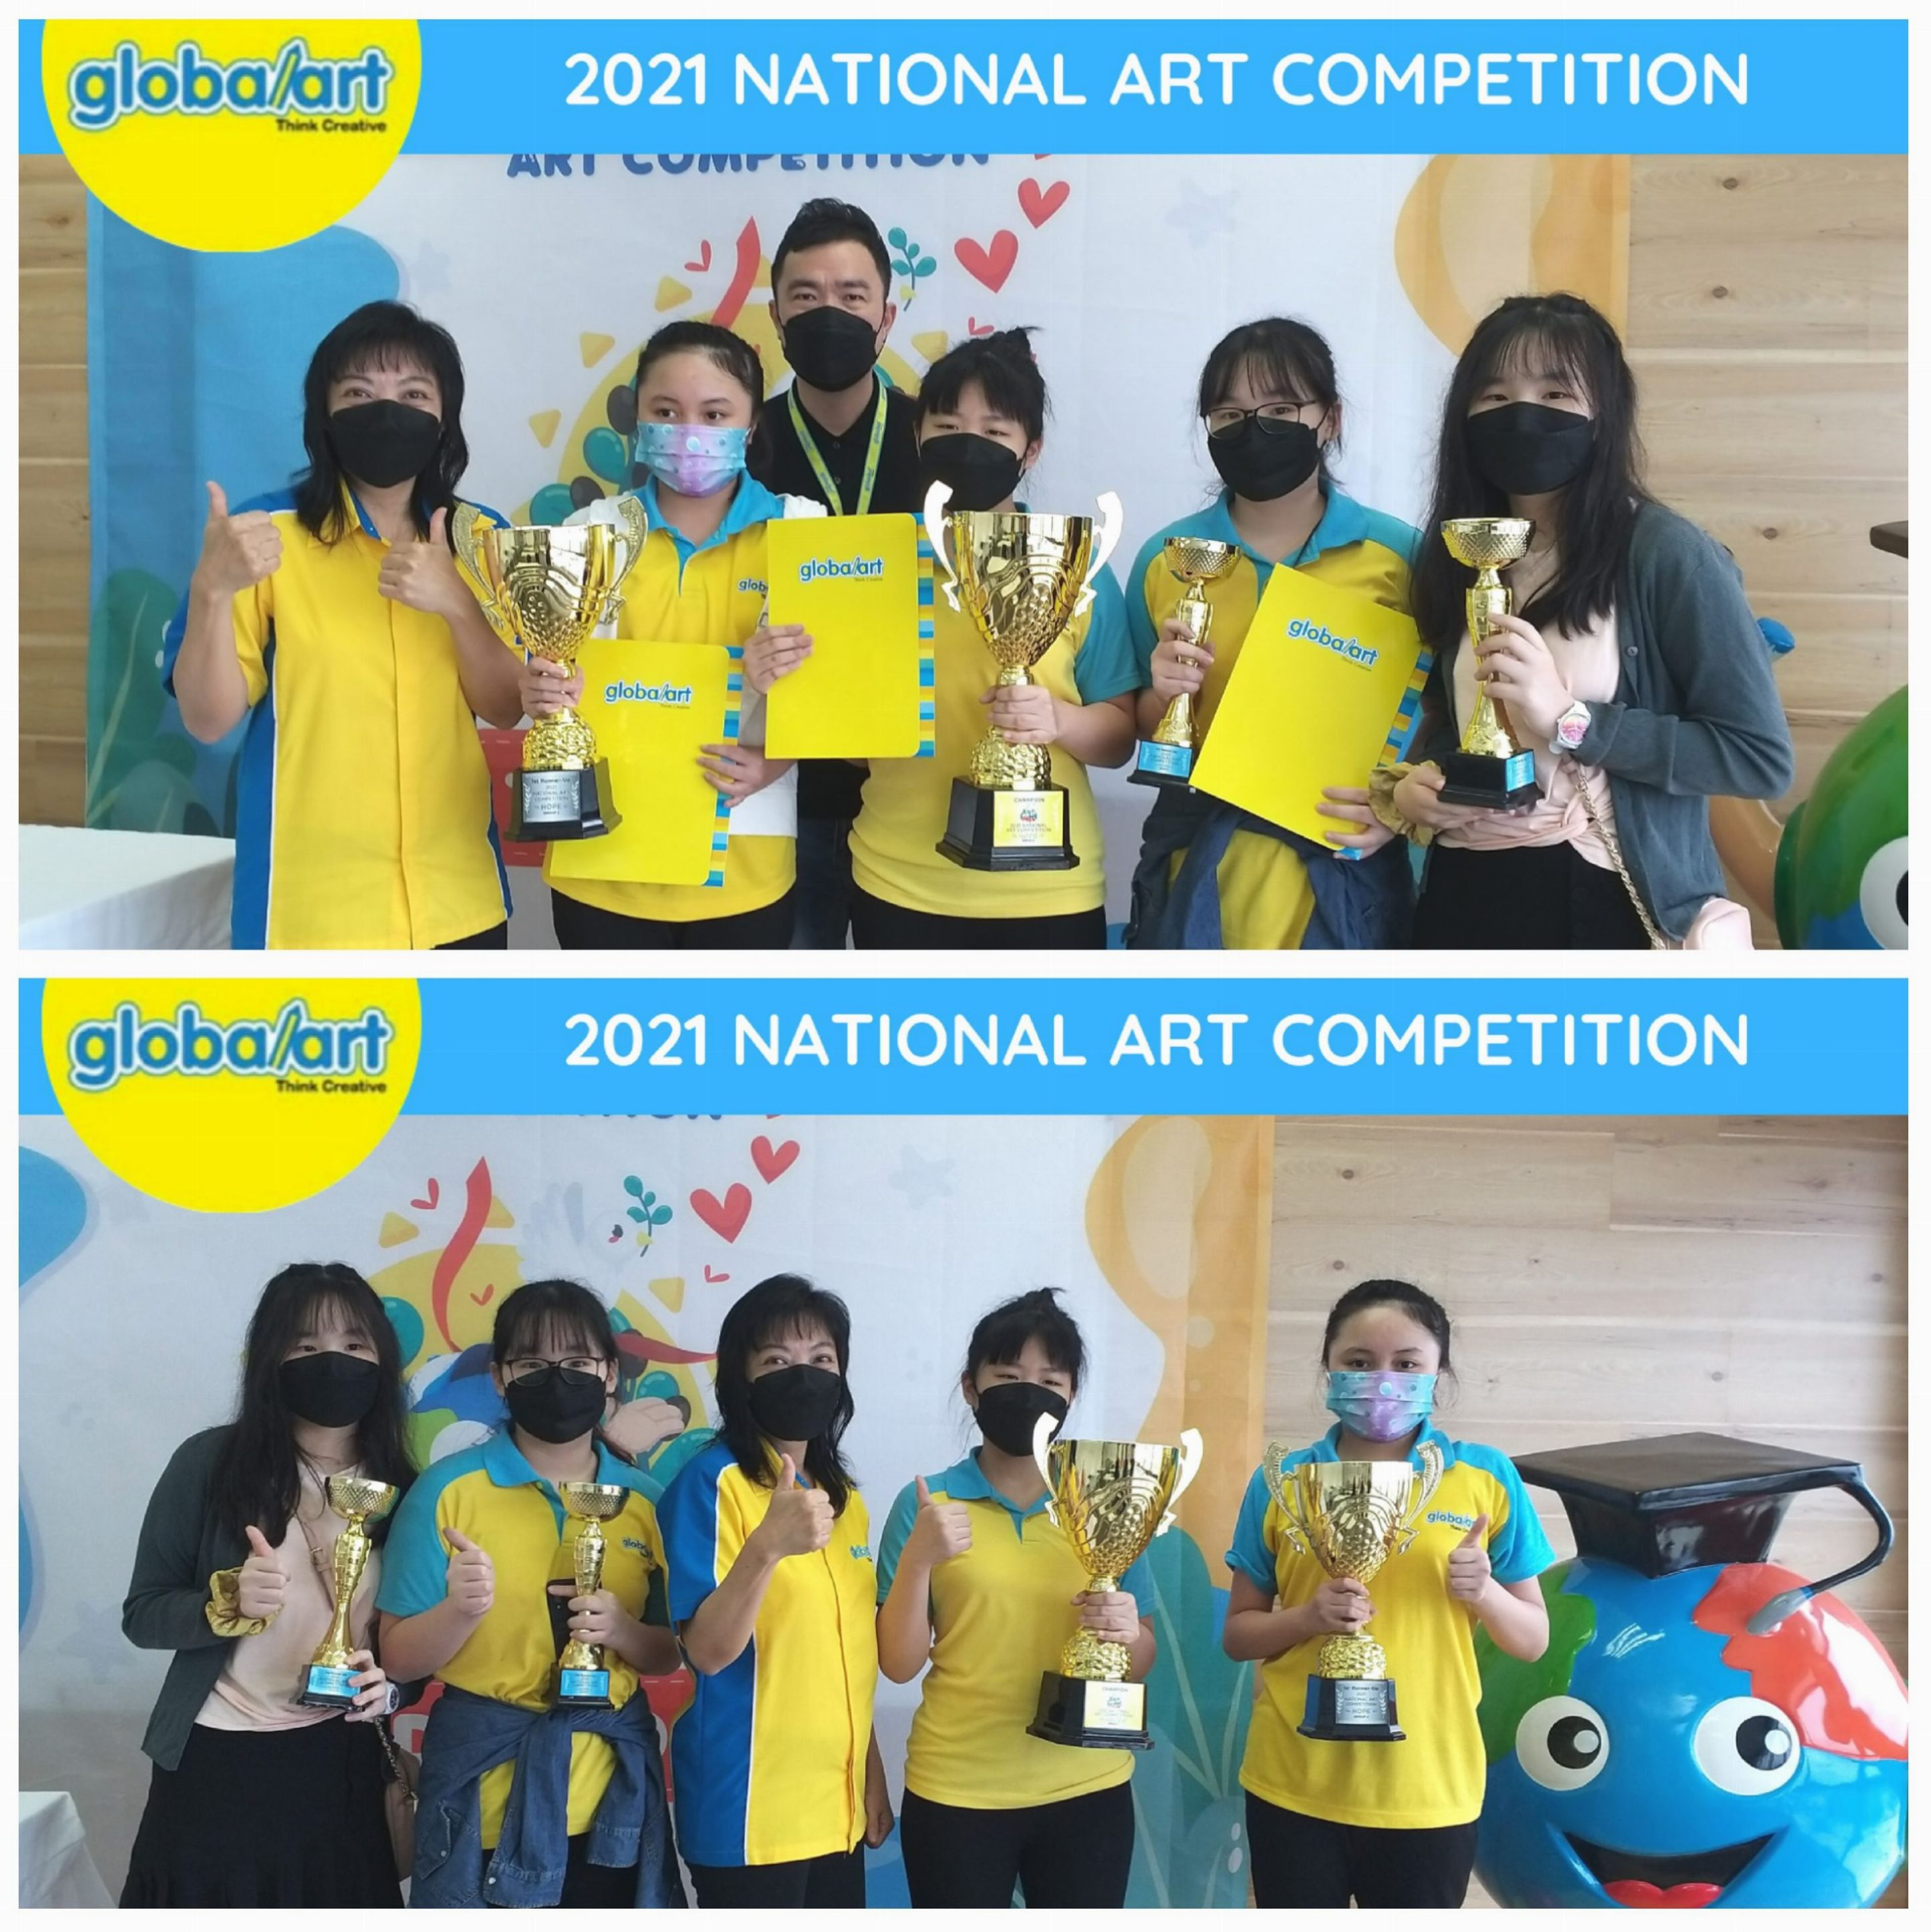 The Winners Of The 2021 Globalart National Art Competition ~ Theme “HOPE”